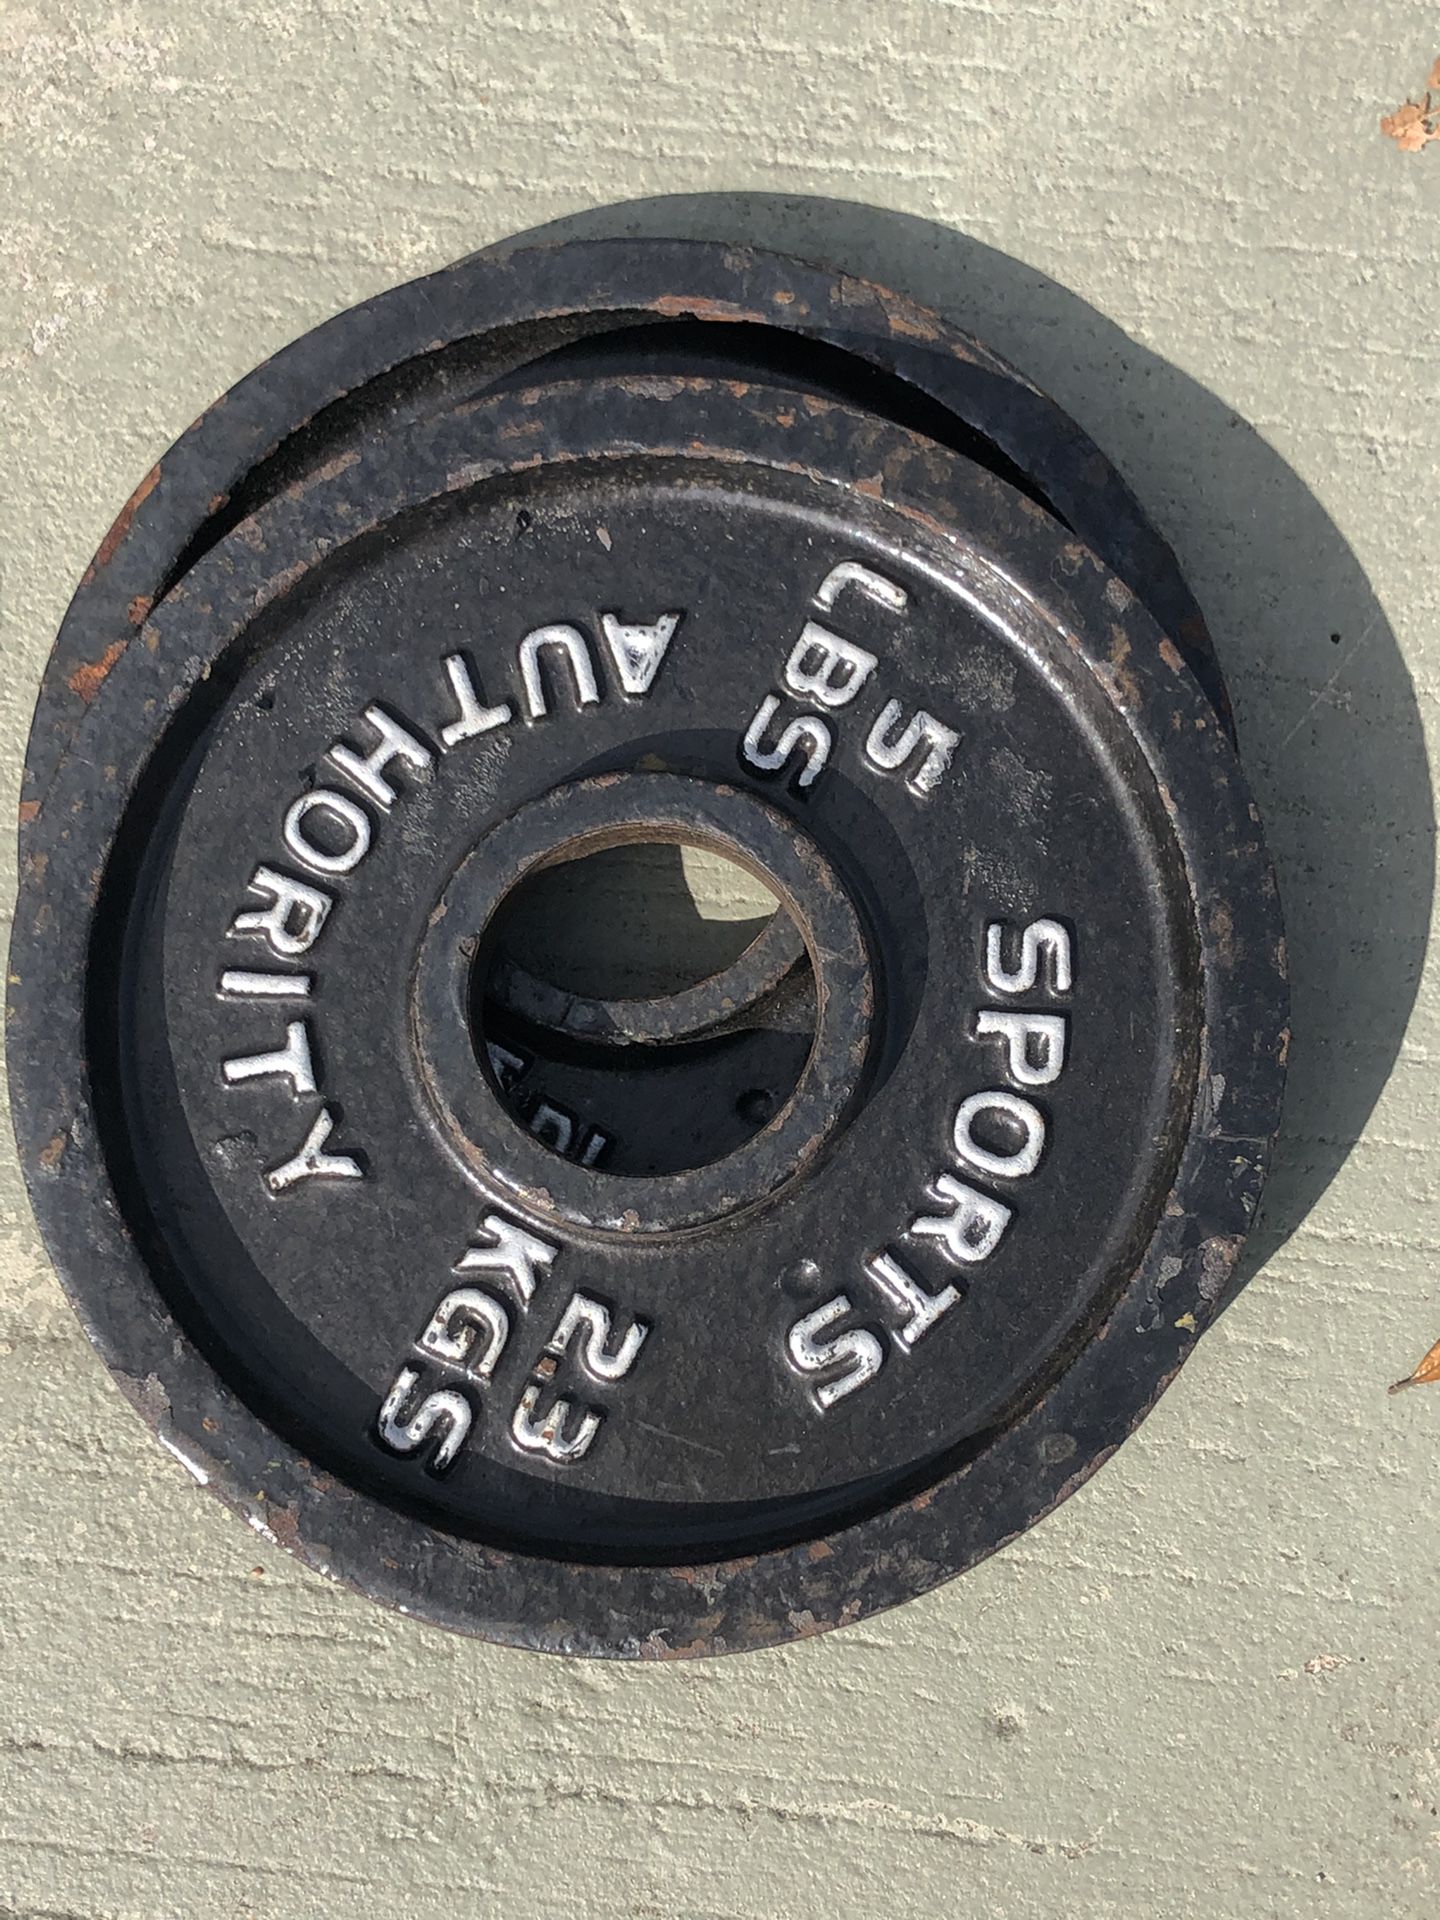 pair of 5lbs Olympic weight plates